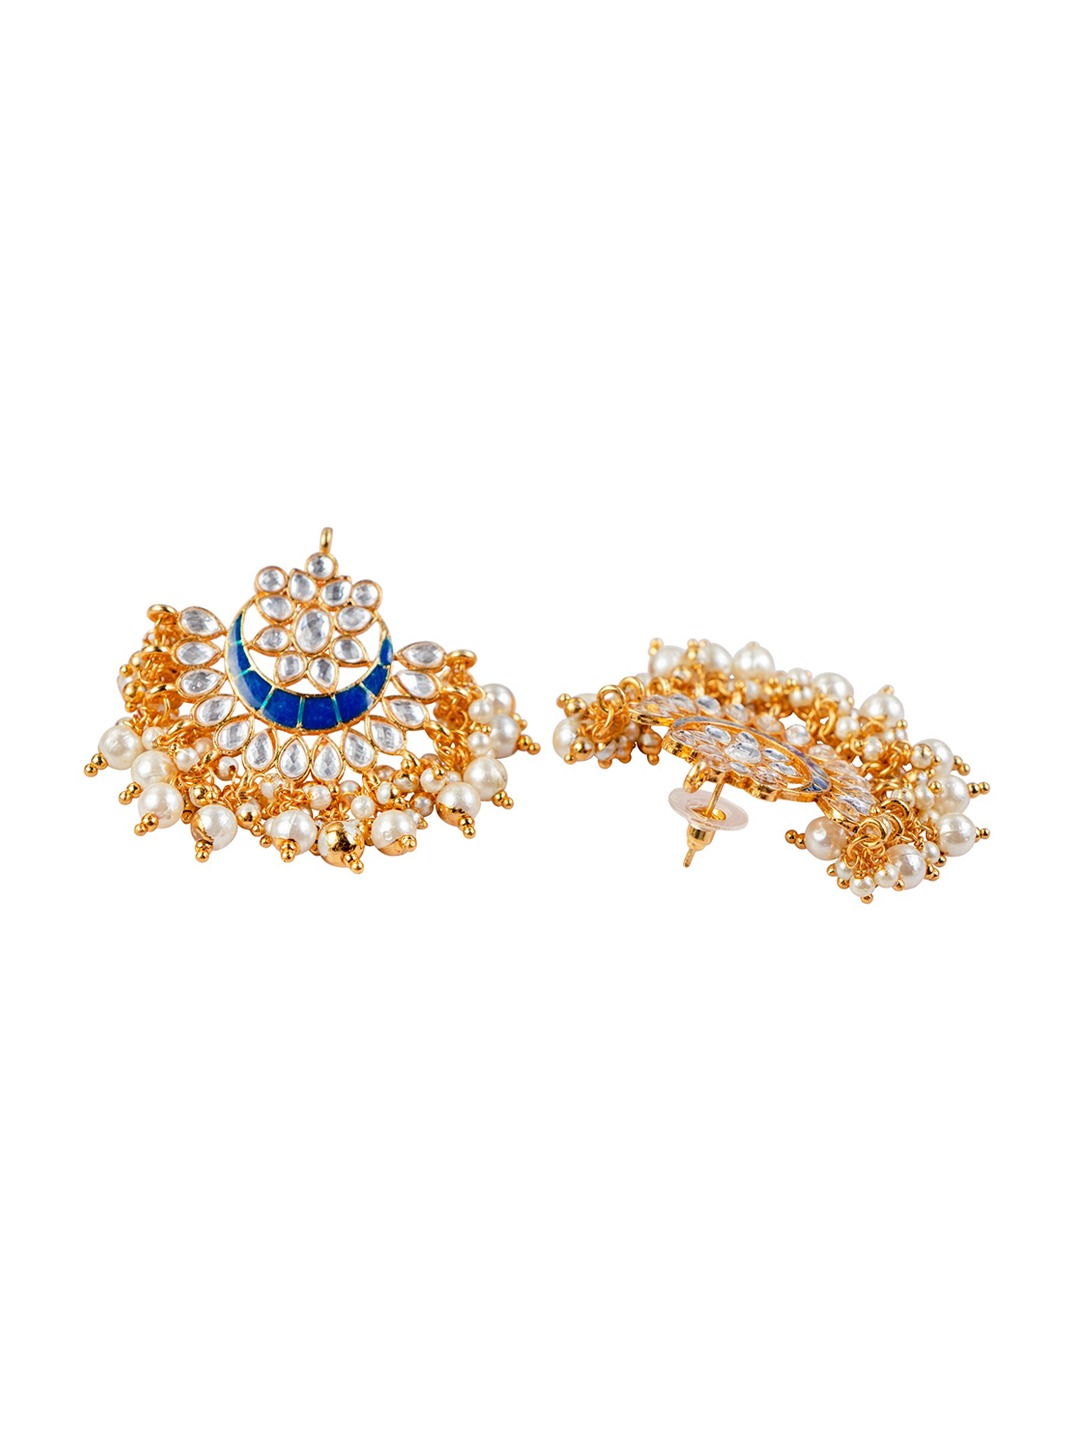 Women's Navy Blue & Gold-Toned Contemporary Chandbalis Earrings - Morkanth